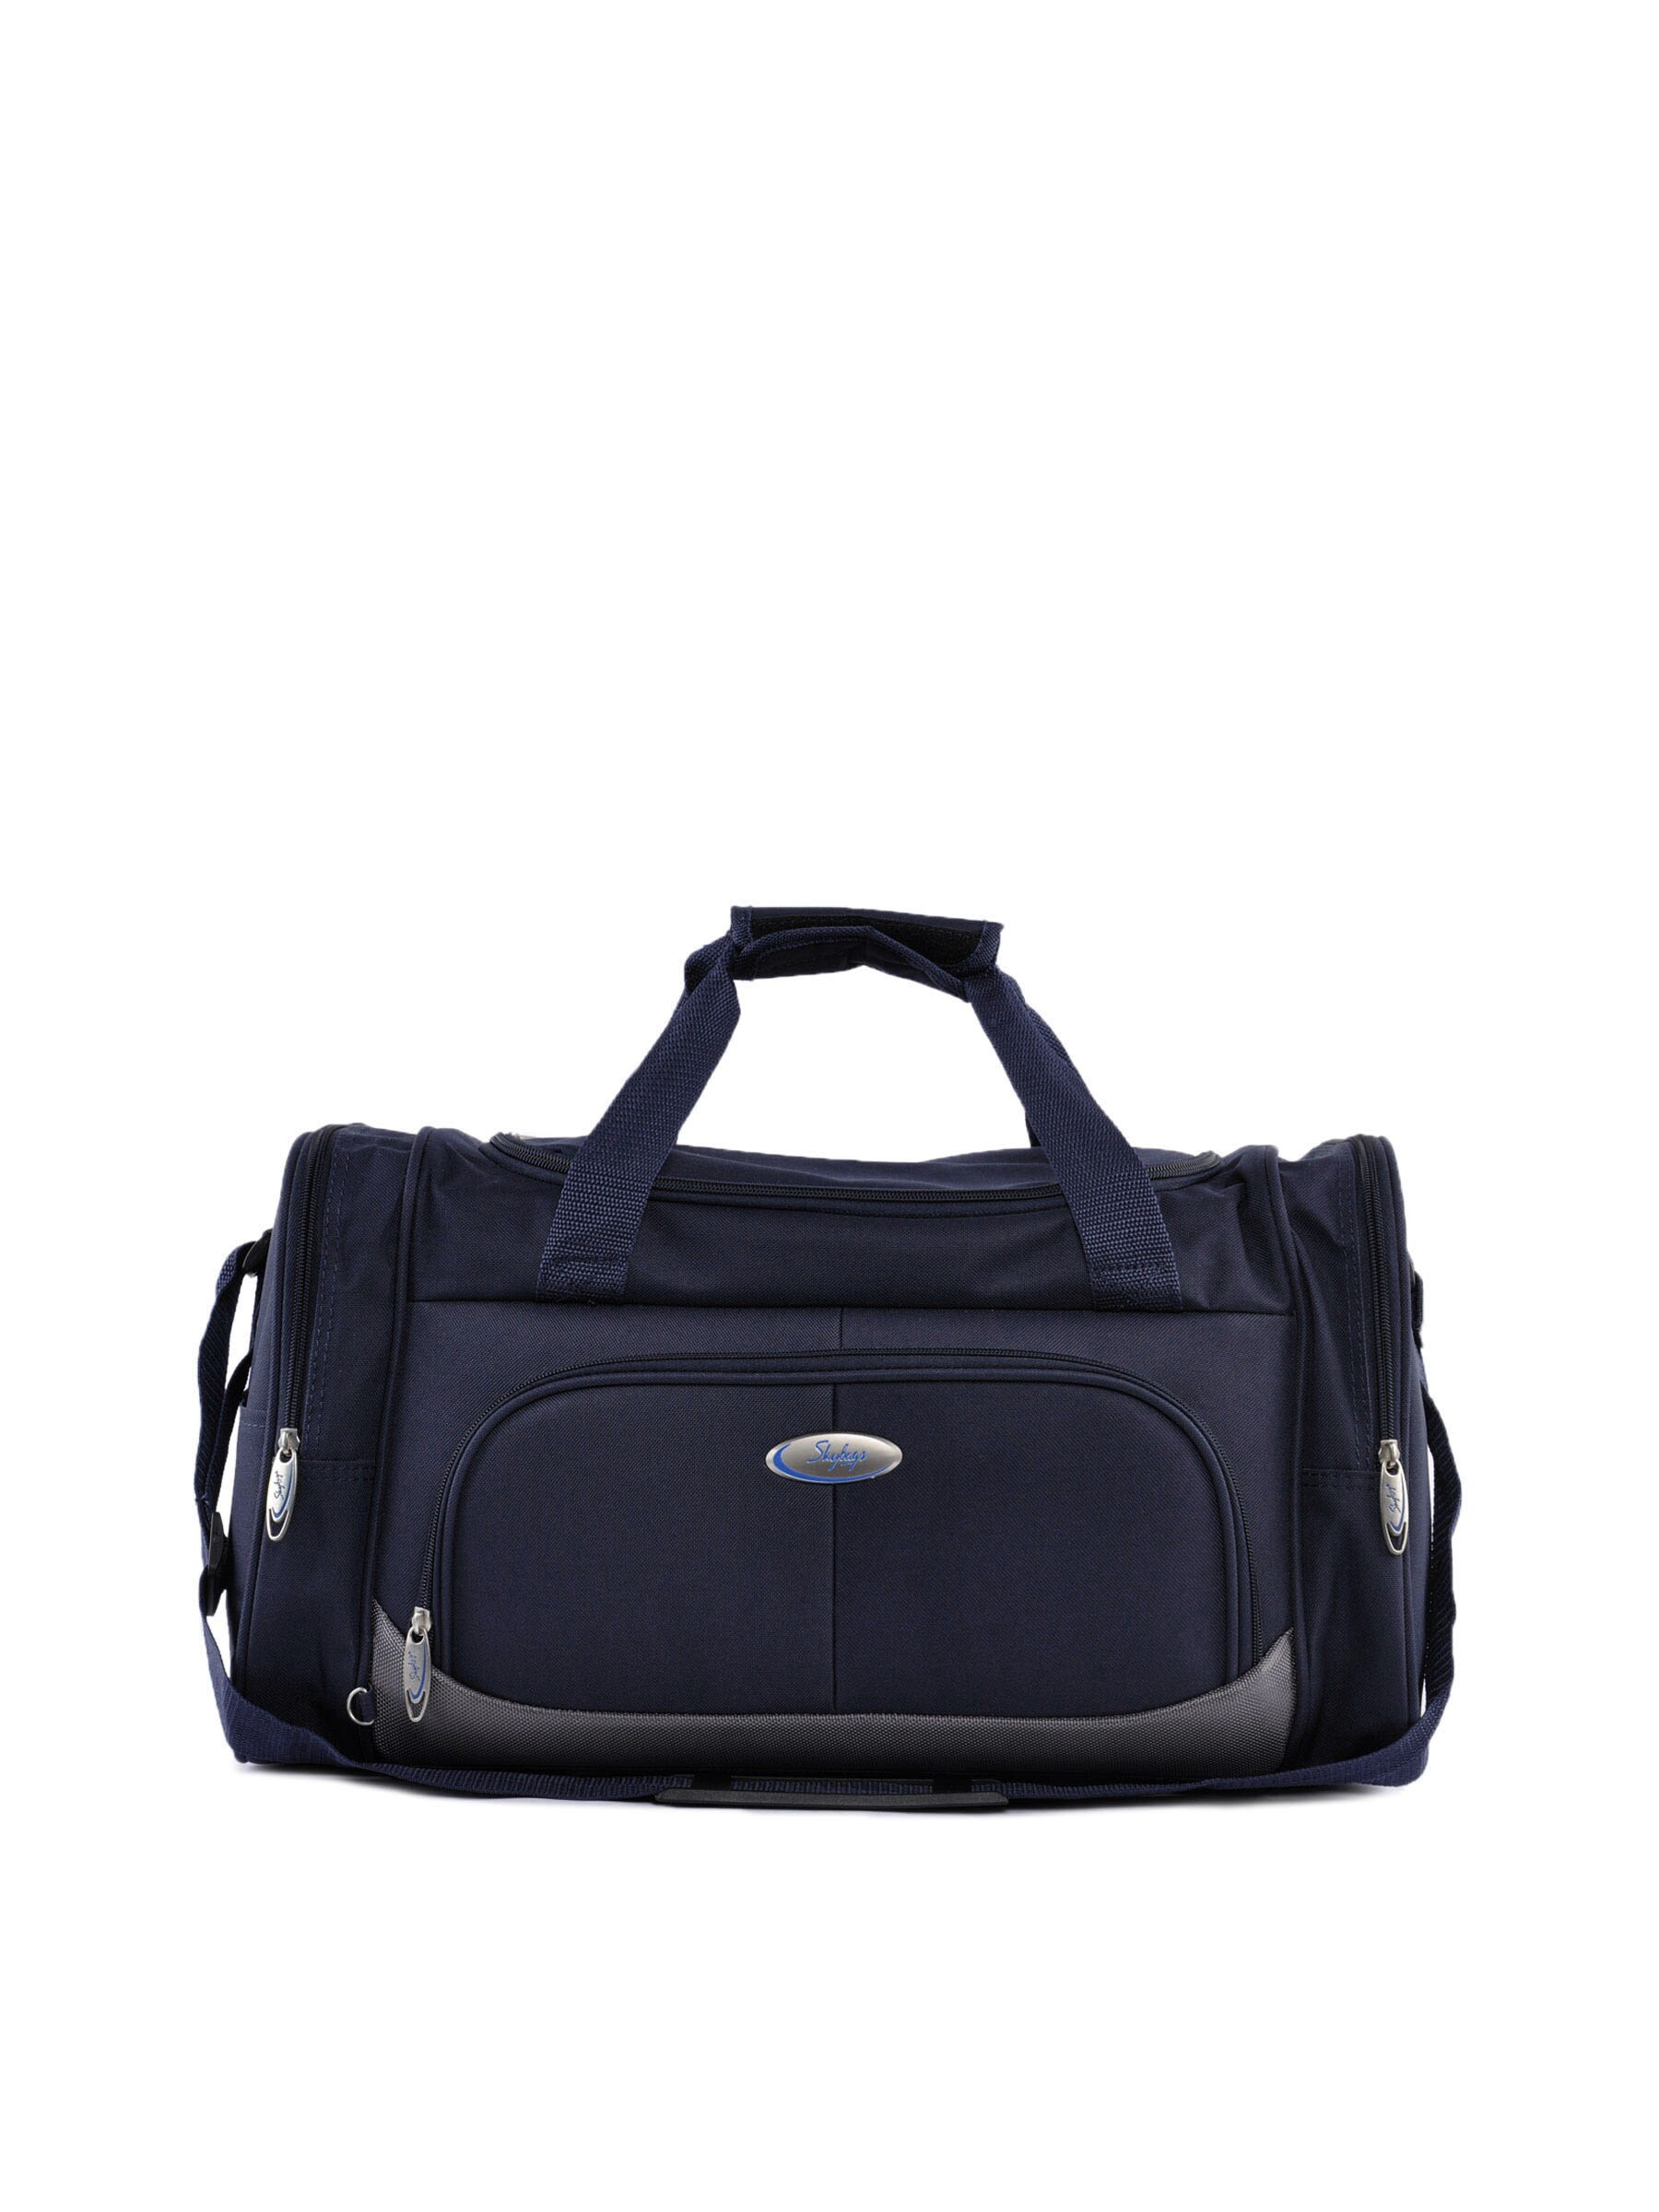 Skybags Unisex Navy Duffle Bag